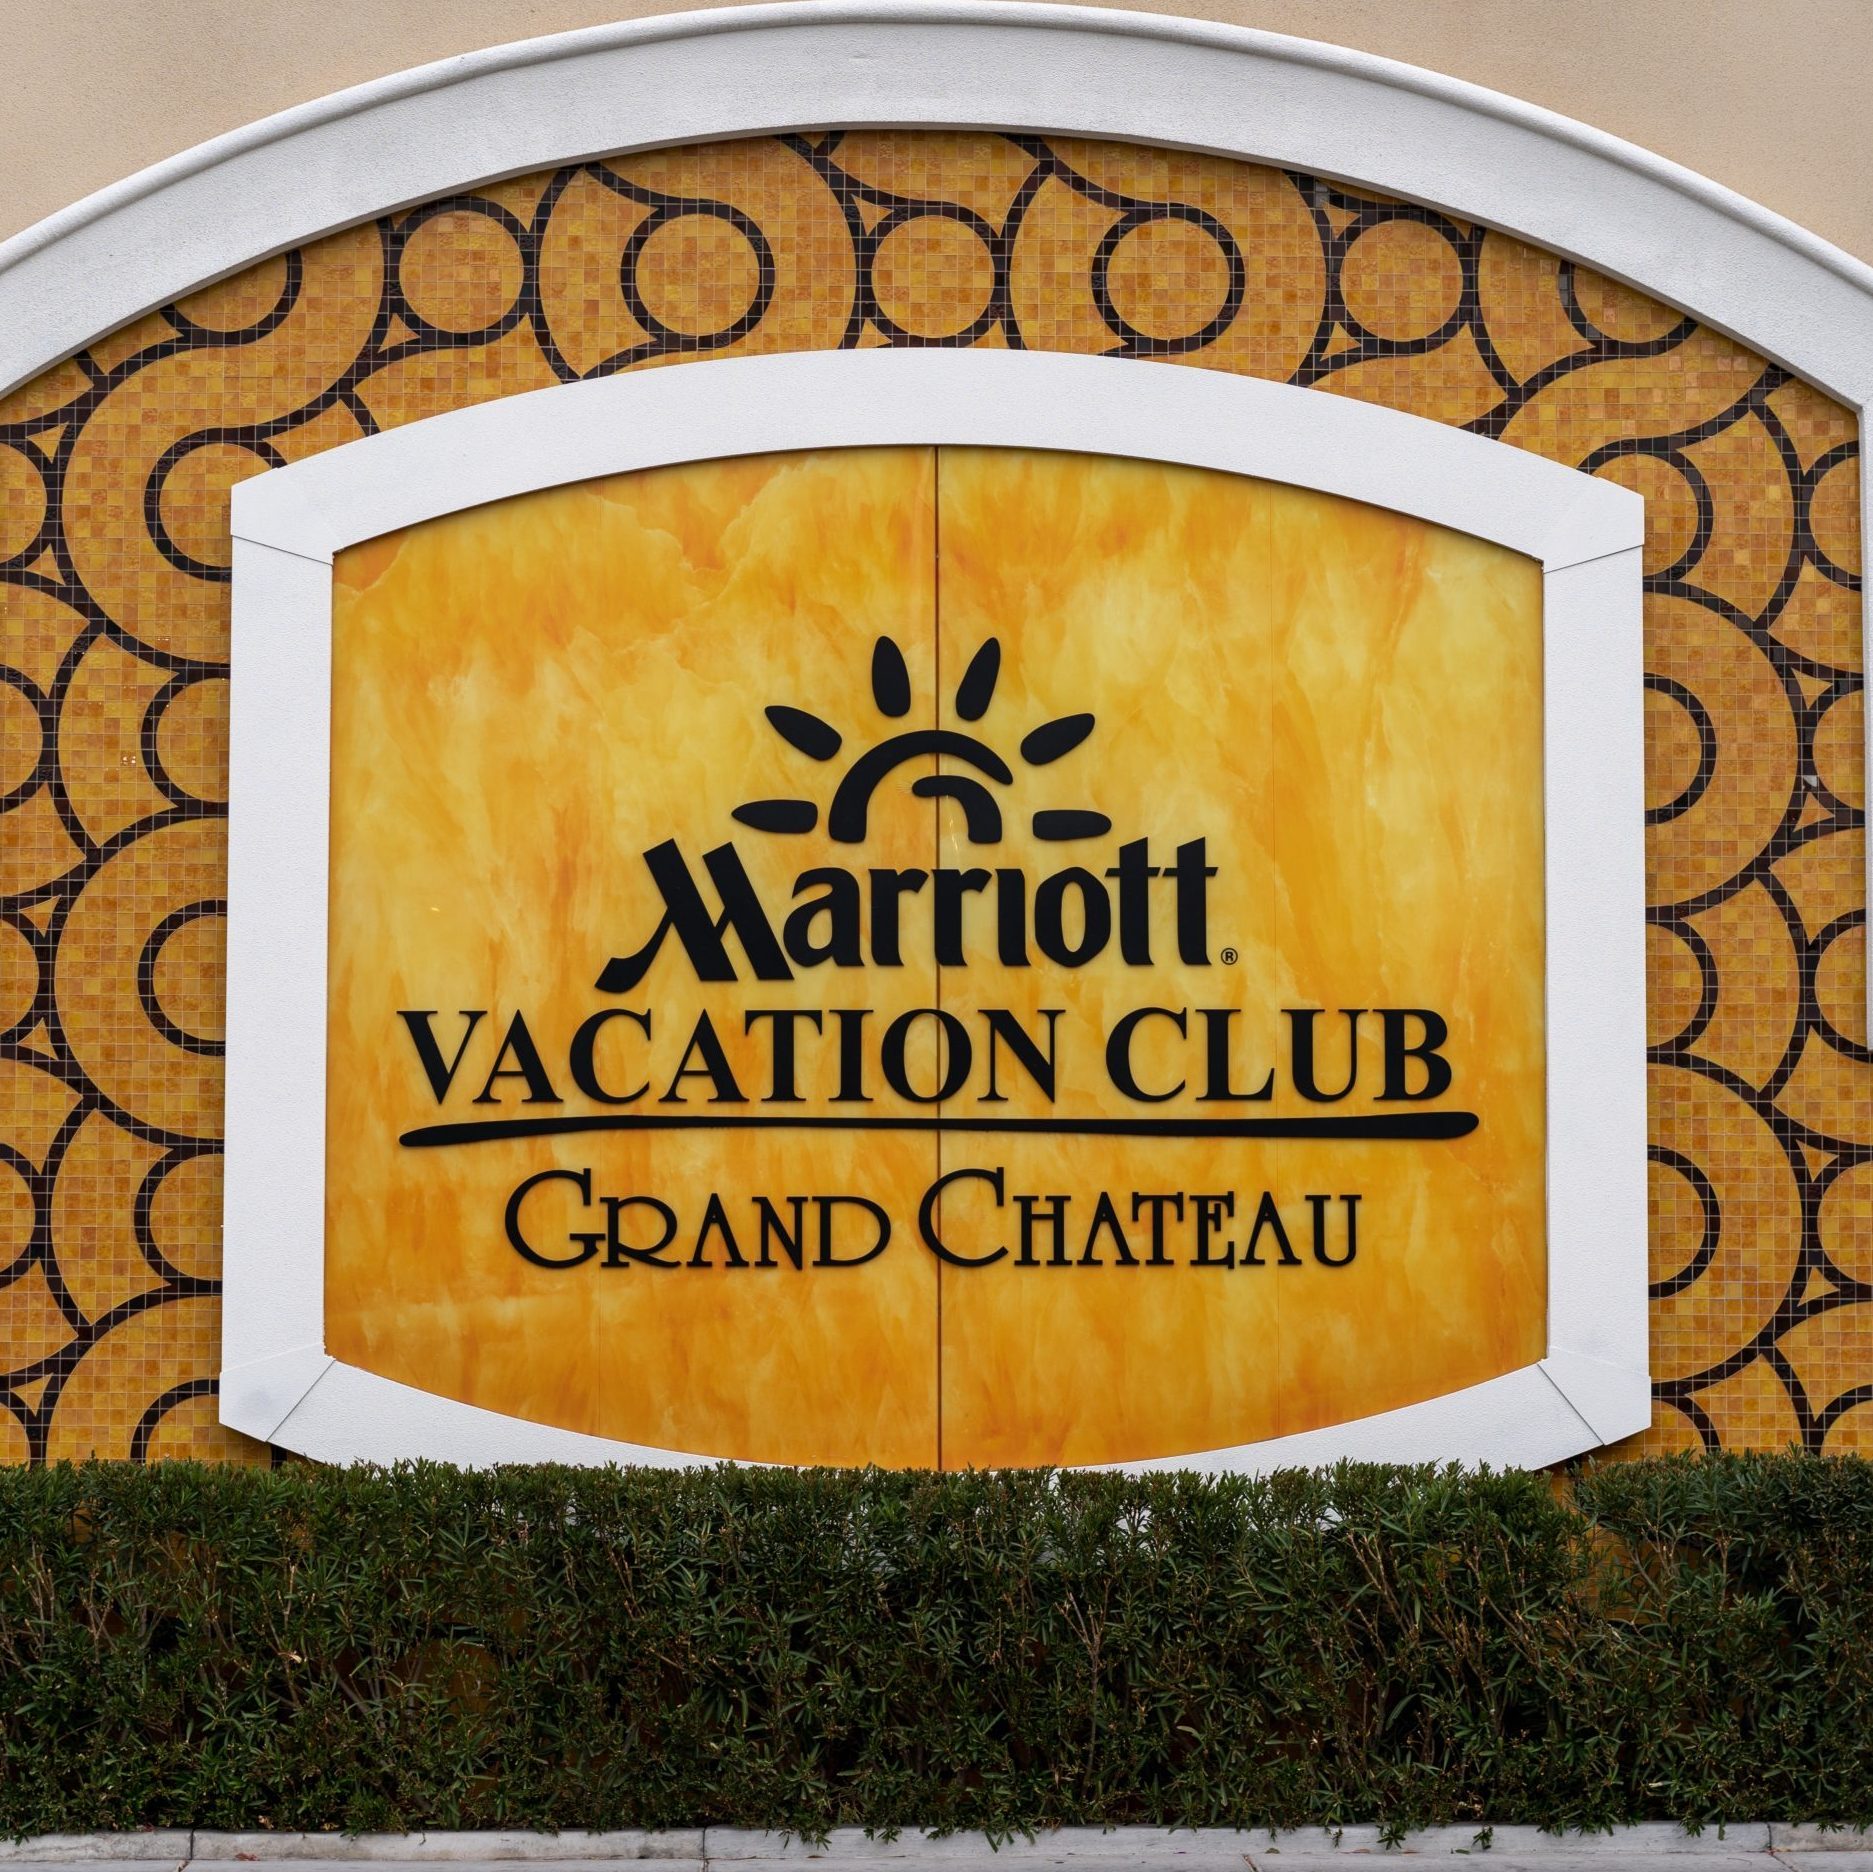 sign for Marriott Grand Chateau Vacation Club